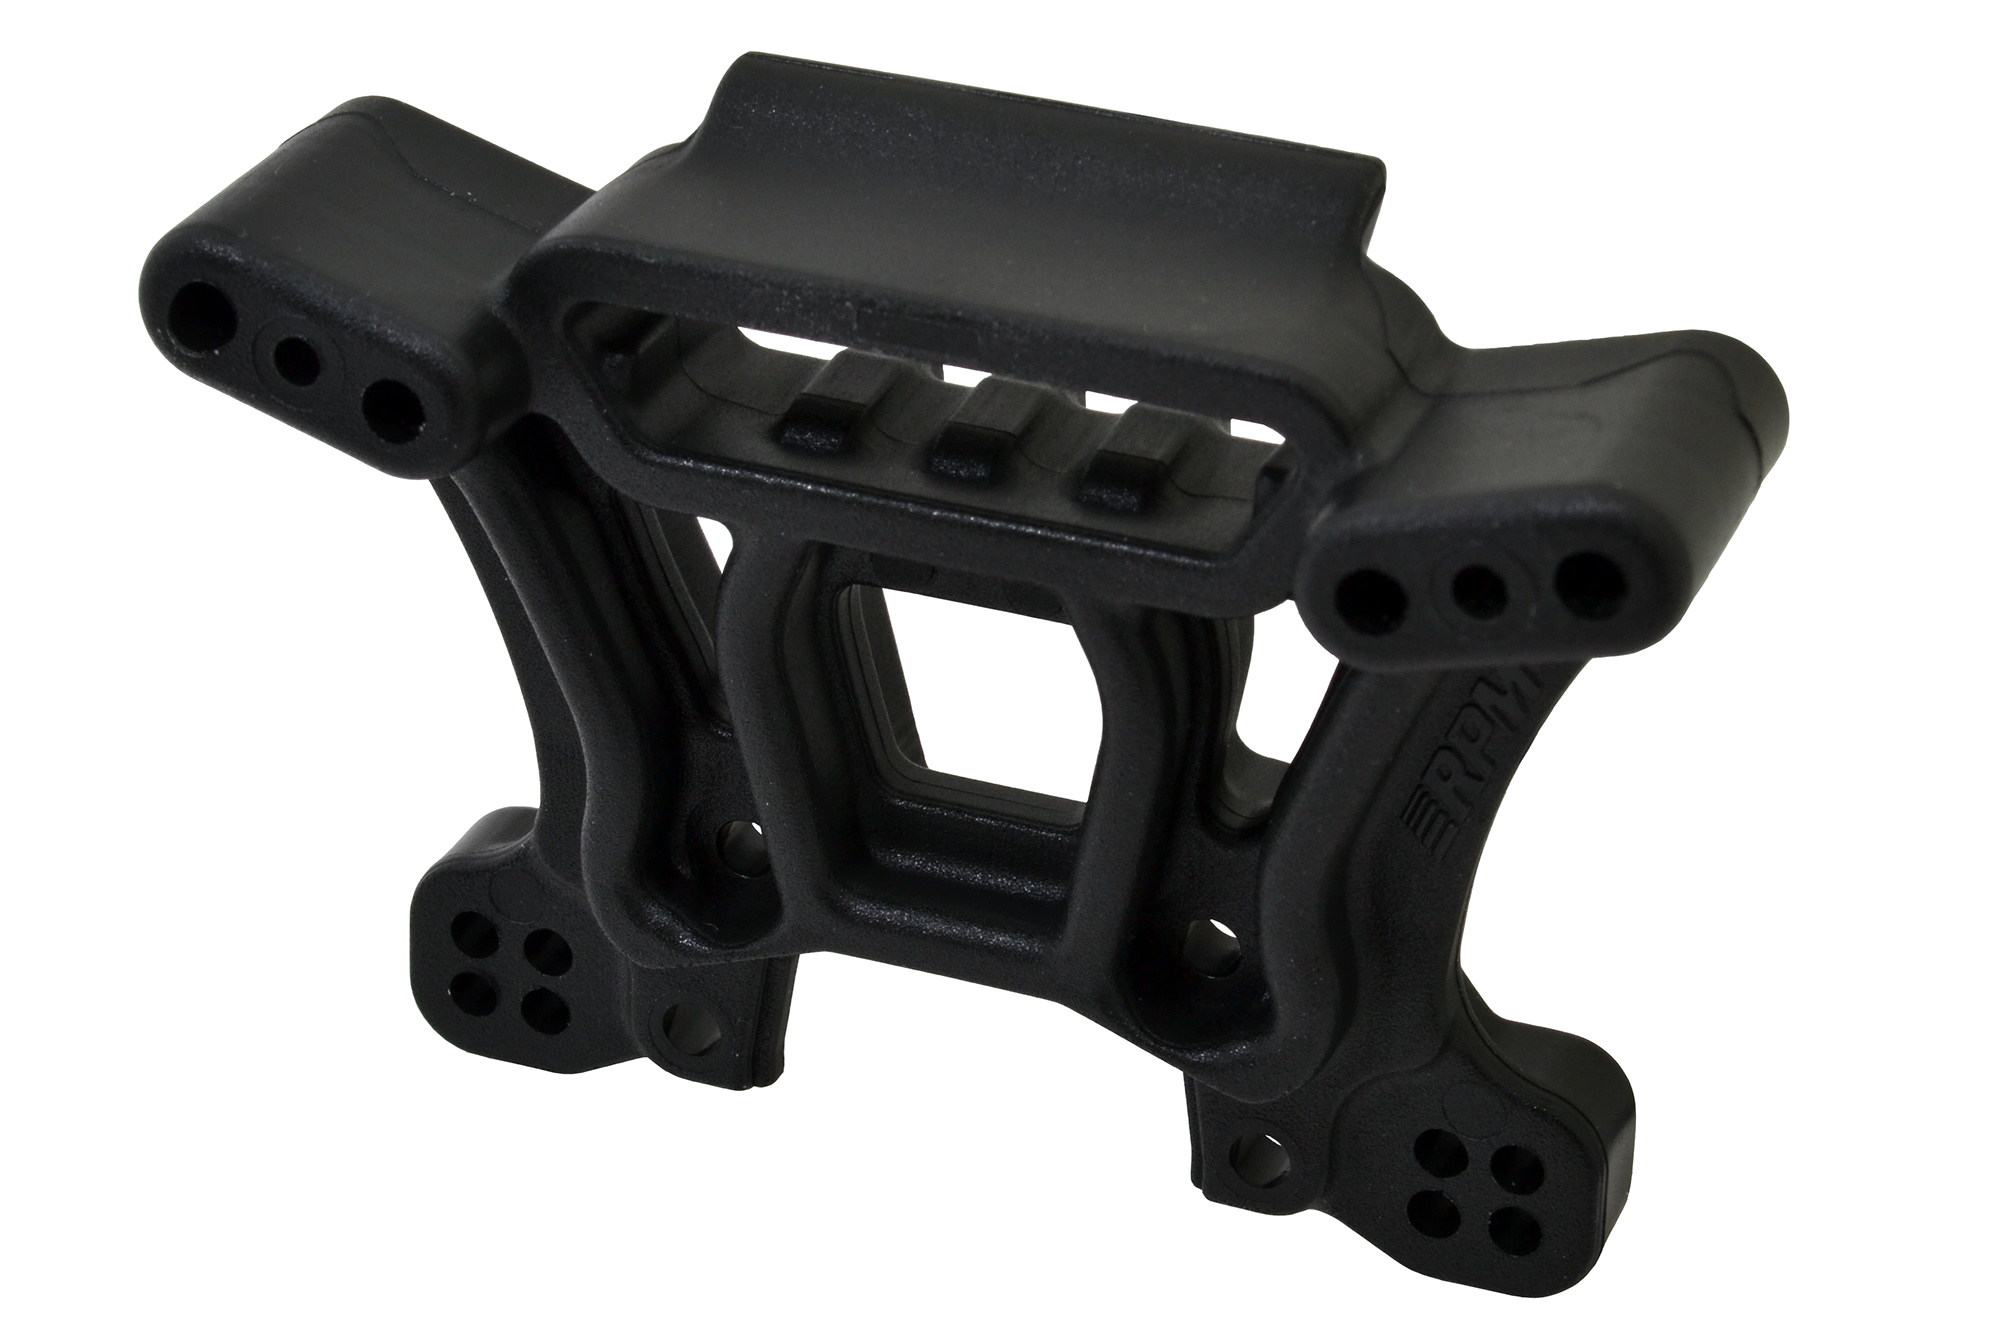 70242 - Front Shock Tower for the Hoss 4x4 & Rustler 4x4